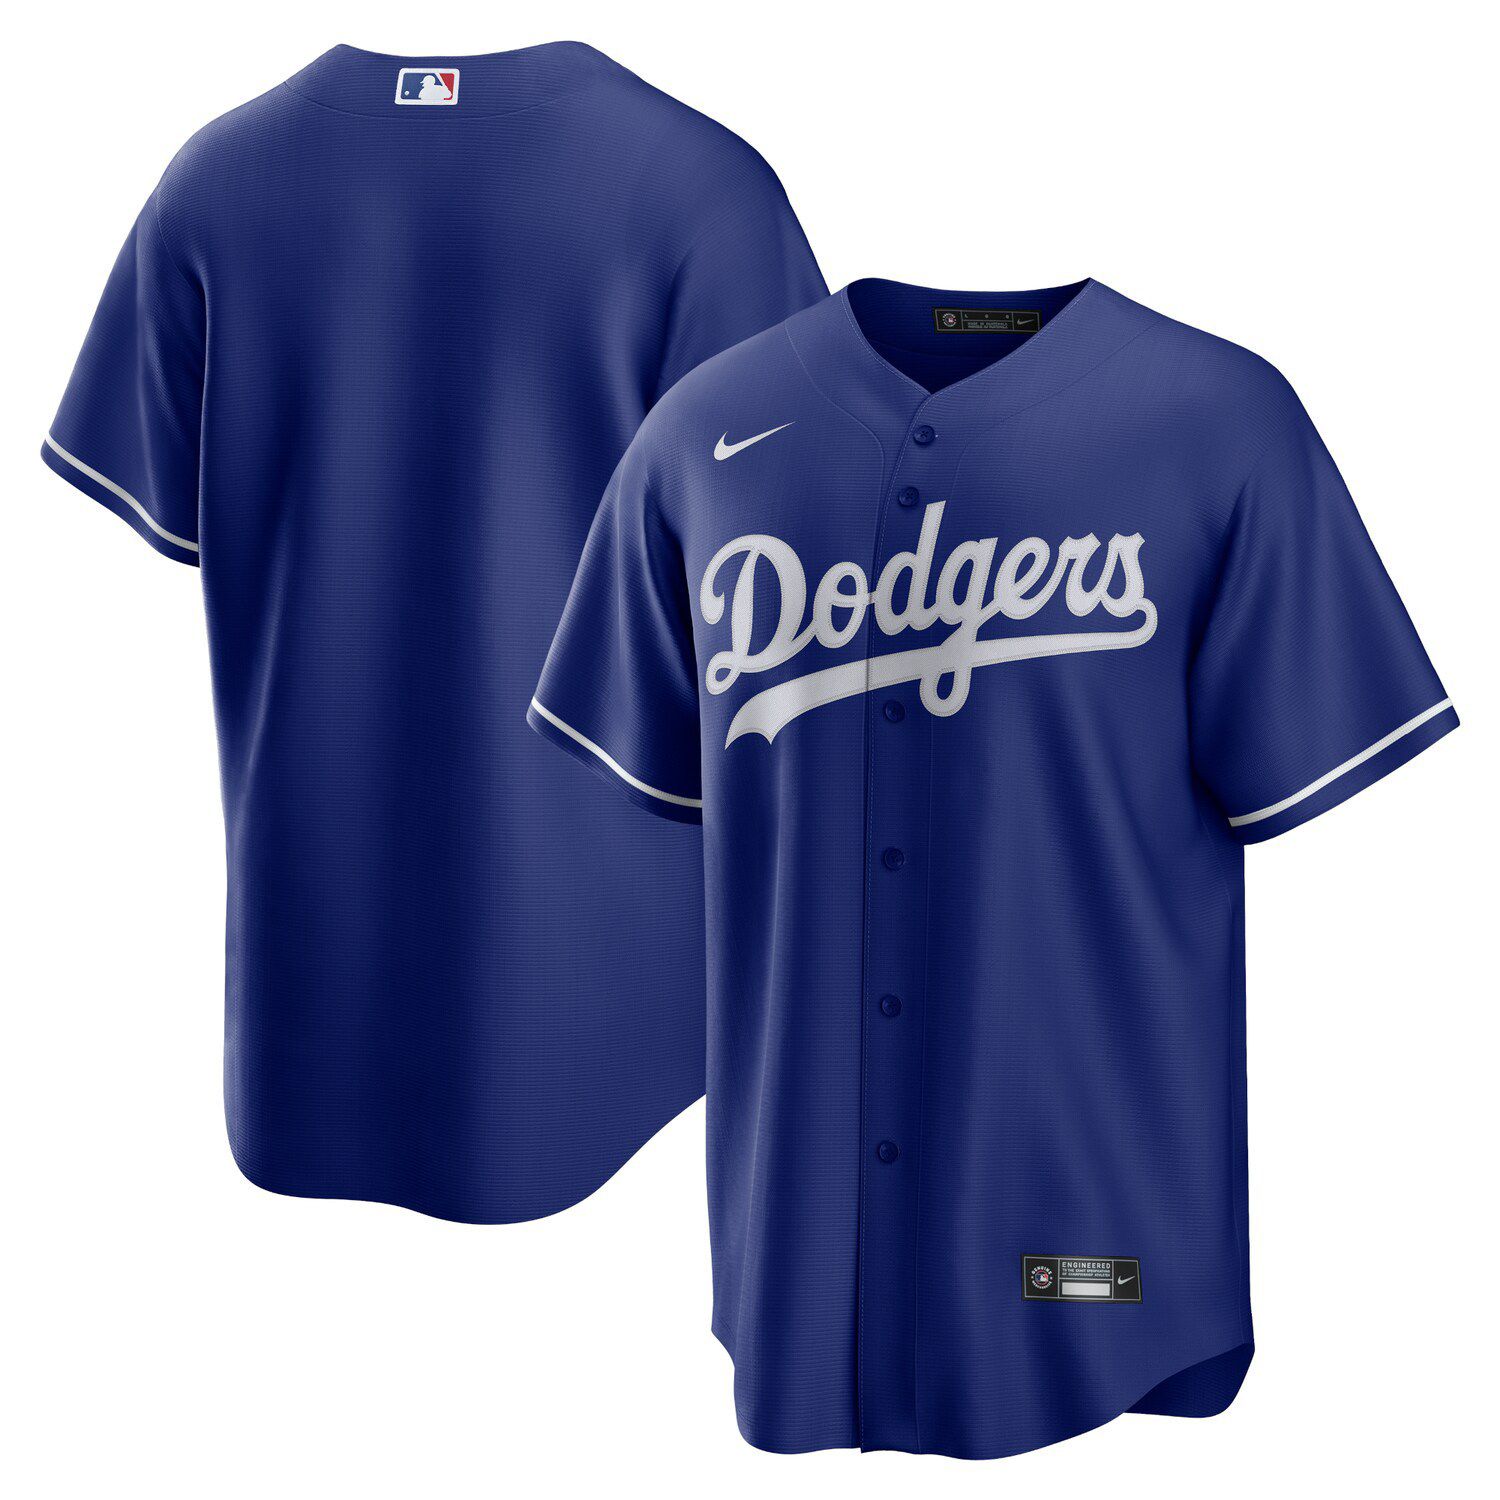 Dodgers No48 Brusdar Graterol Men's Nike Royal Alternate 2020 World Series Champions Authentic Player Jersey